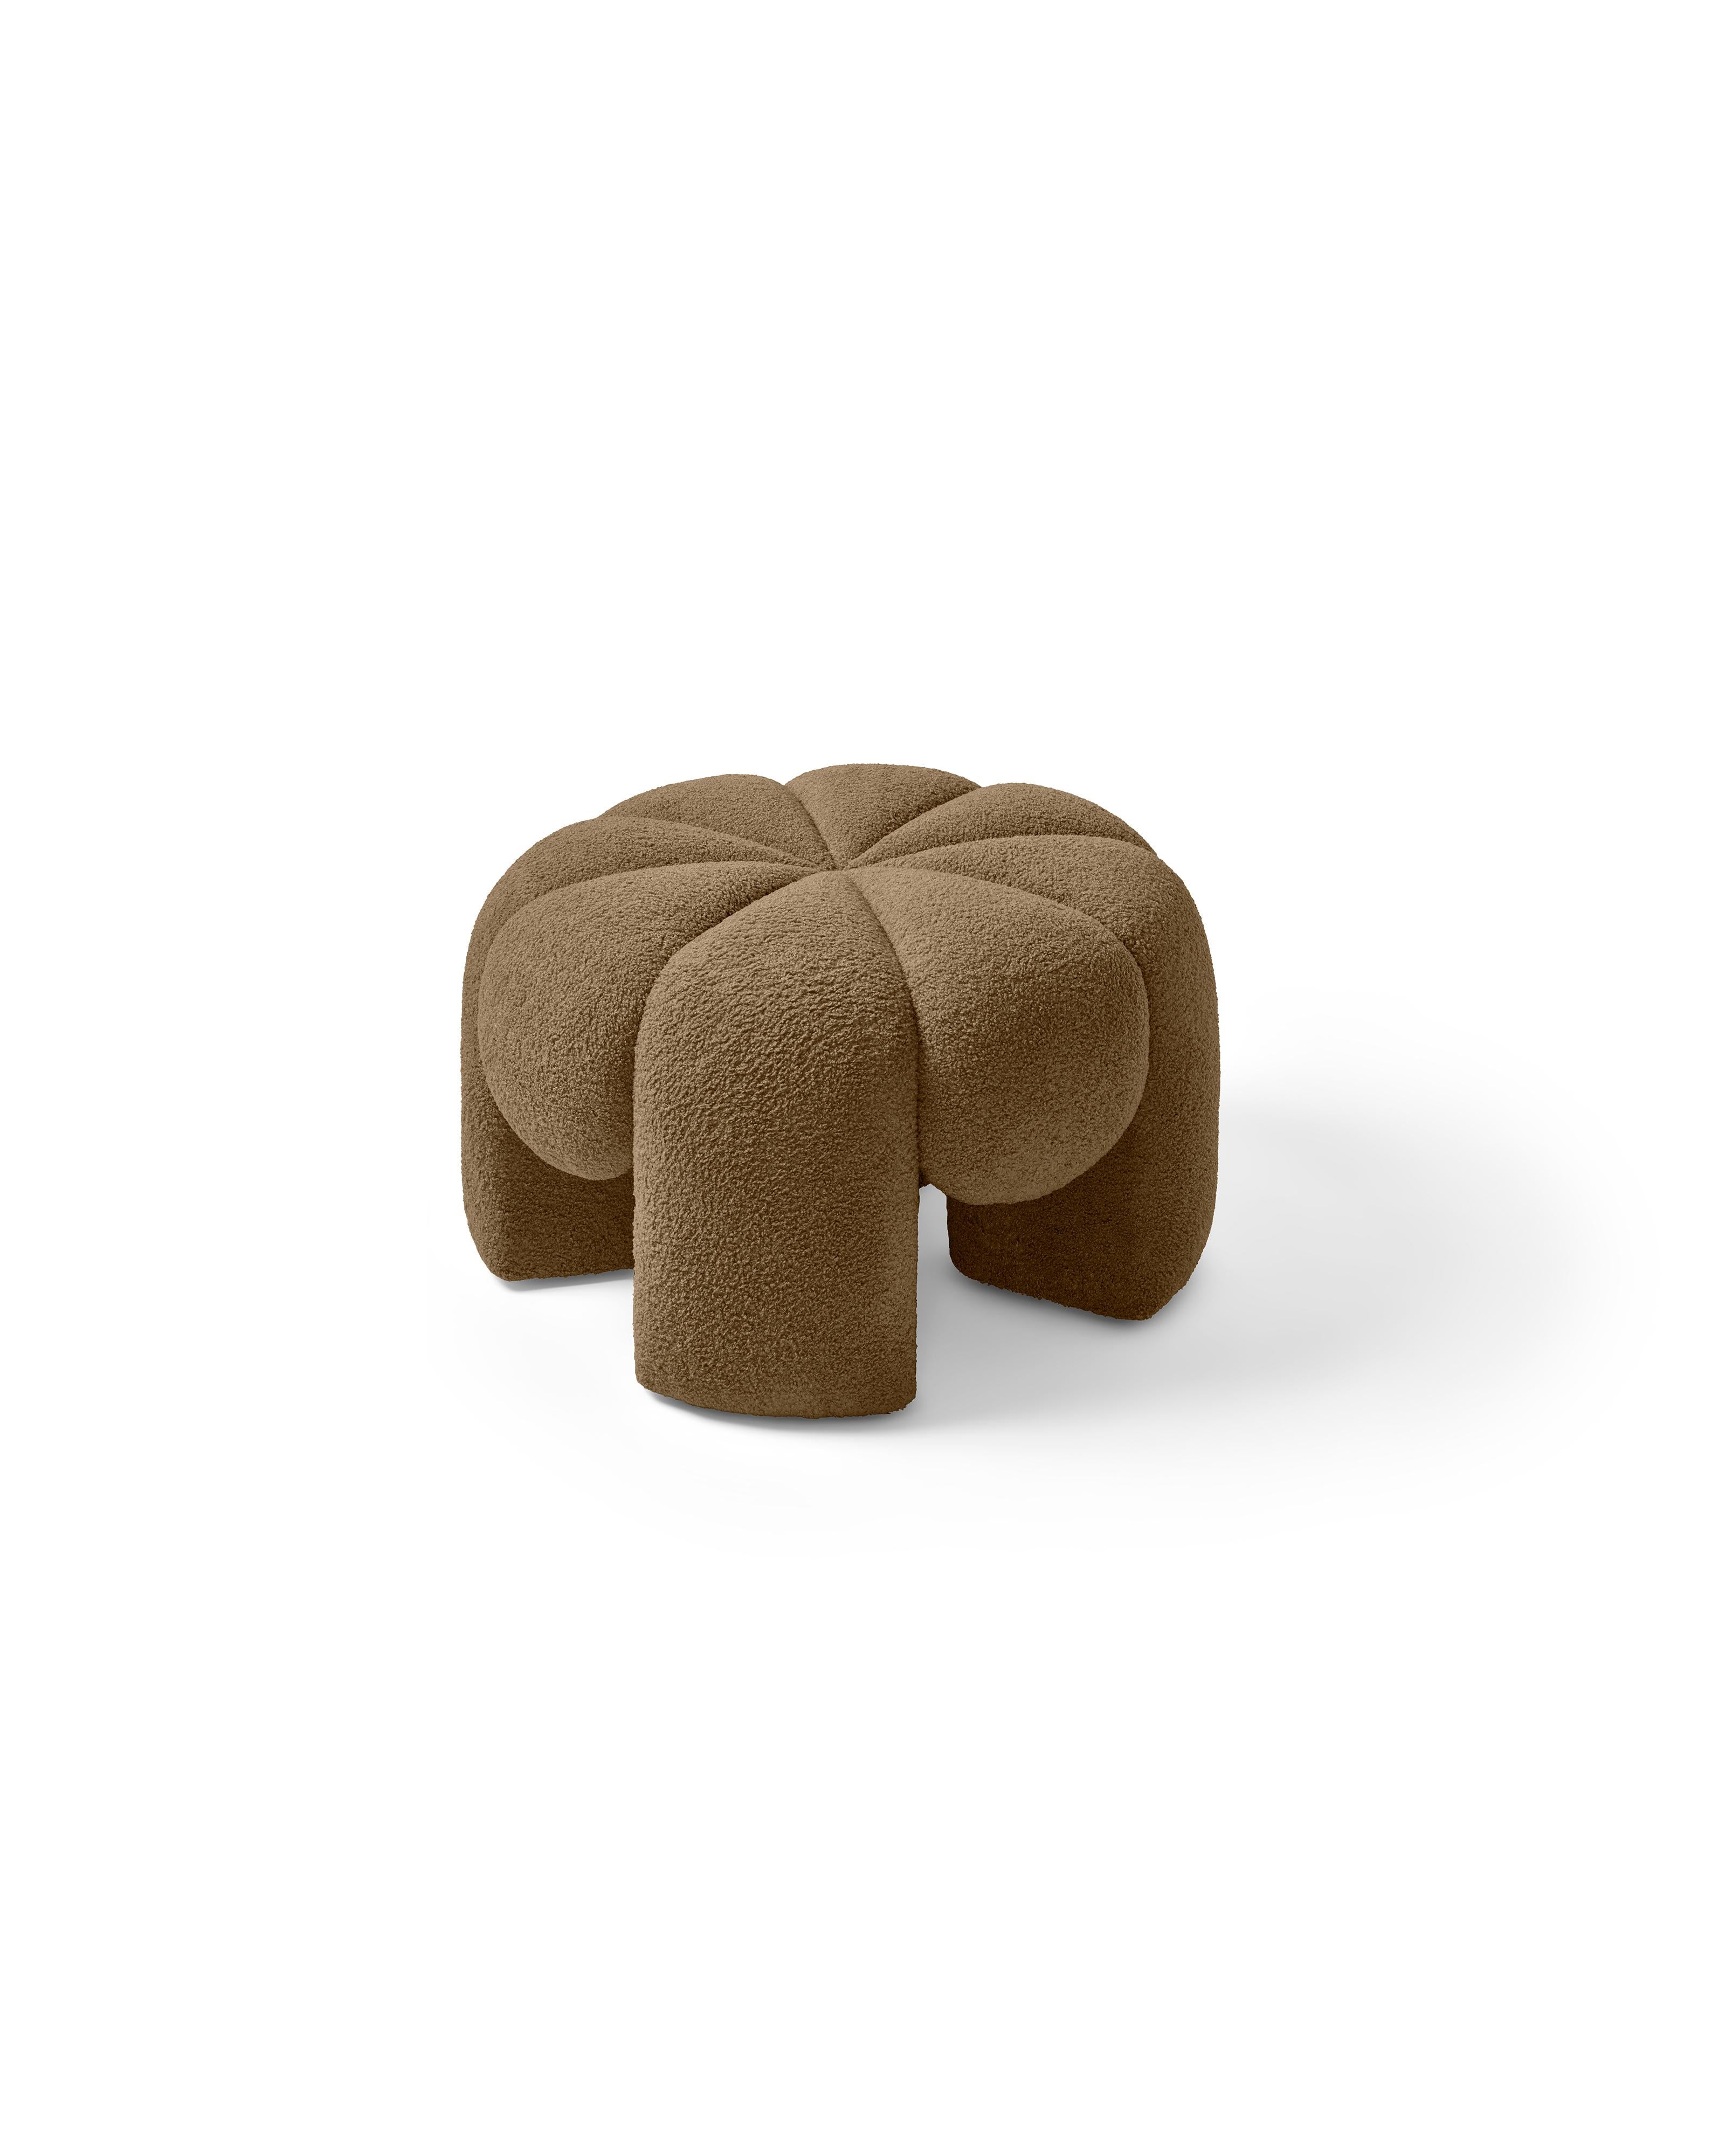 fluffy puffy 'Big Marshmallow' pouf For Sale 3